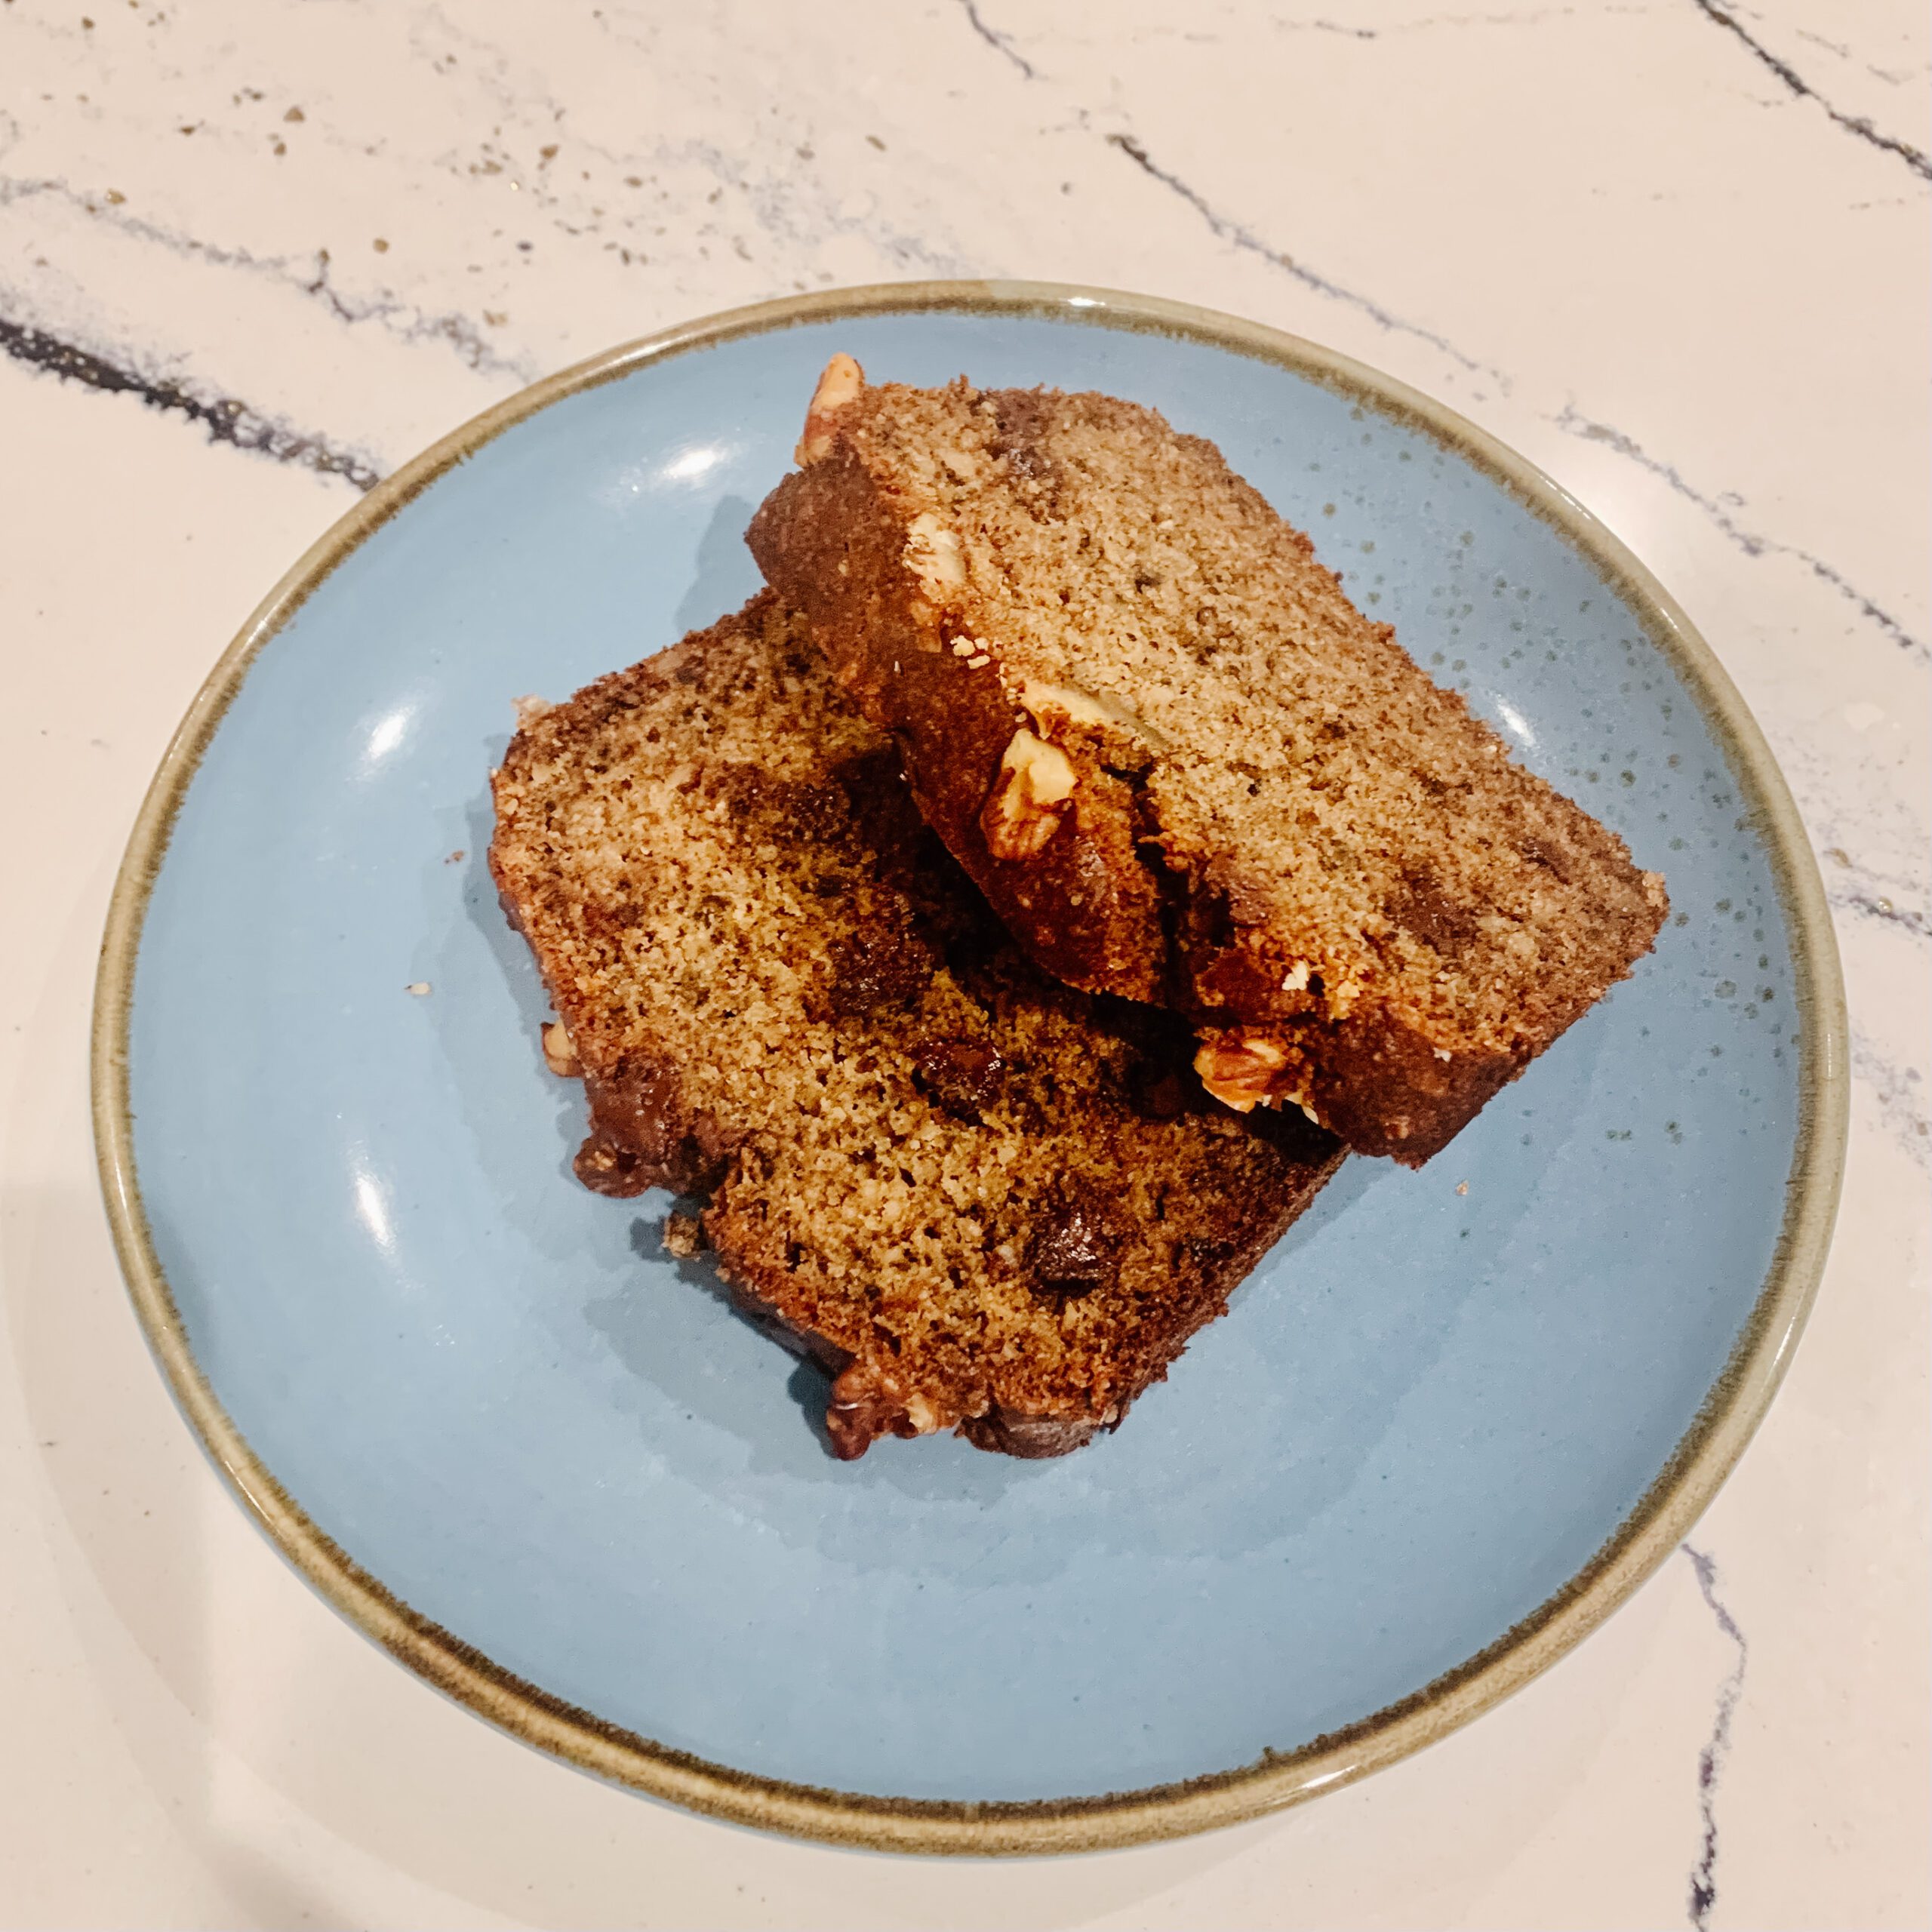 blue plate on a marble countertop with two slicces of gluten-free banana bread